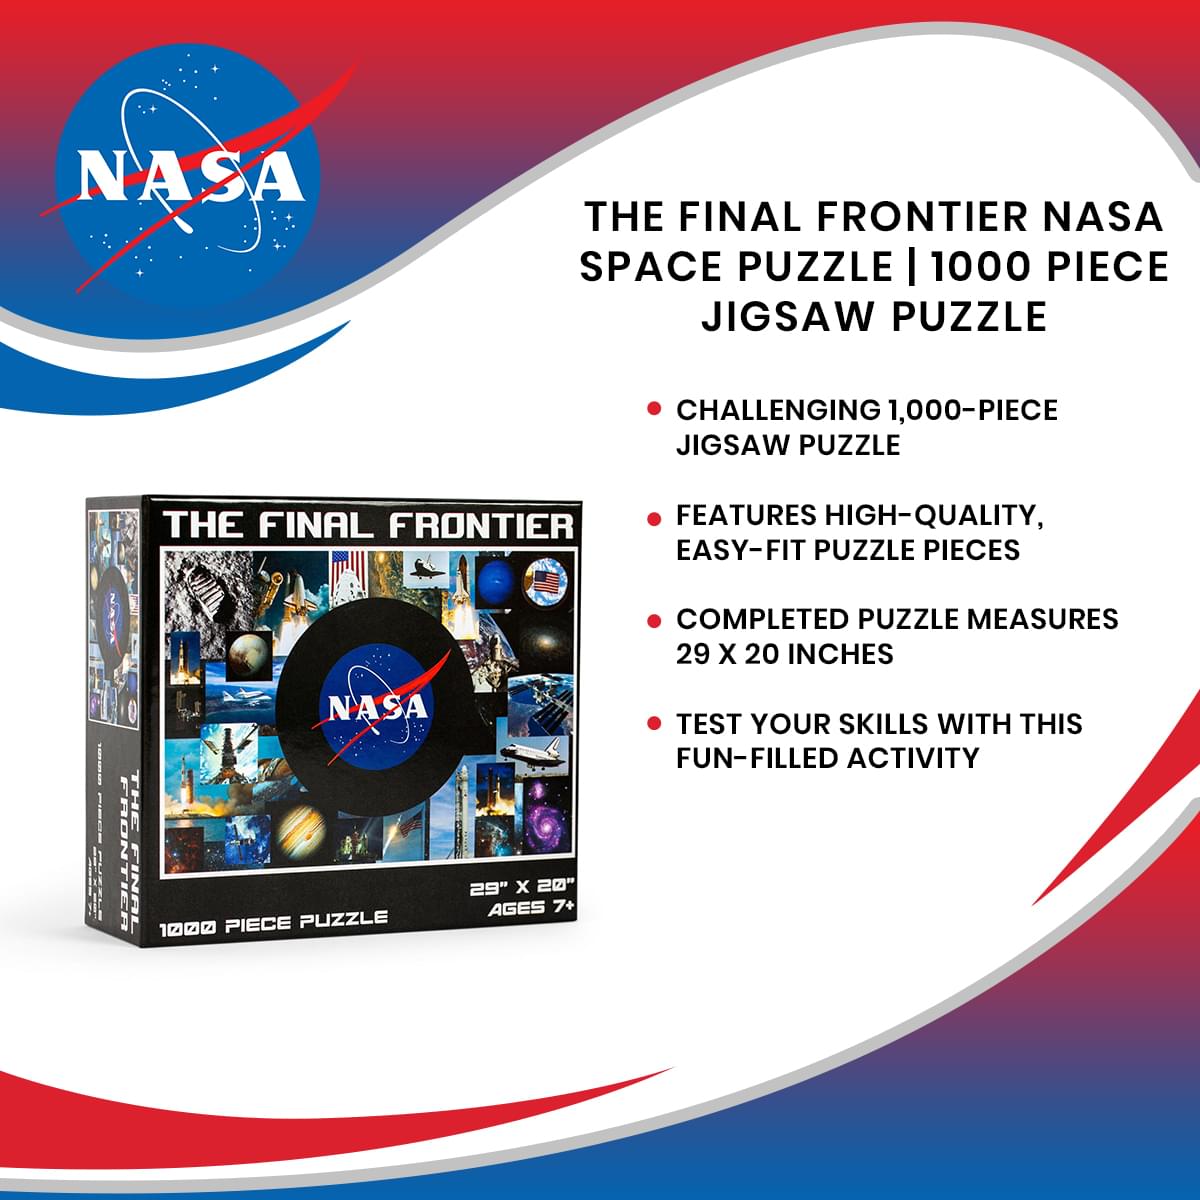 The Final Frontier NASA Space Puzzle | 1000 Piece Jigsaw Puzzle